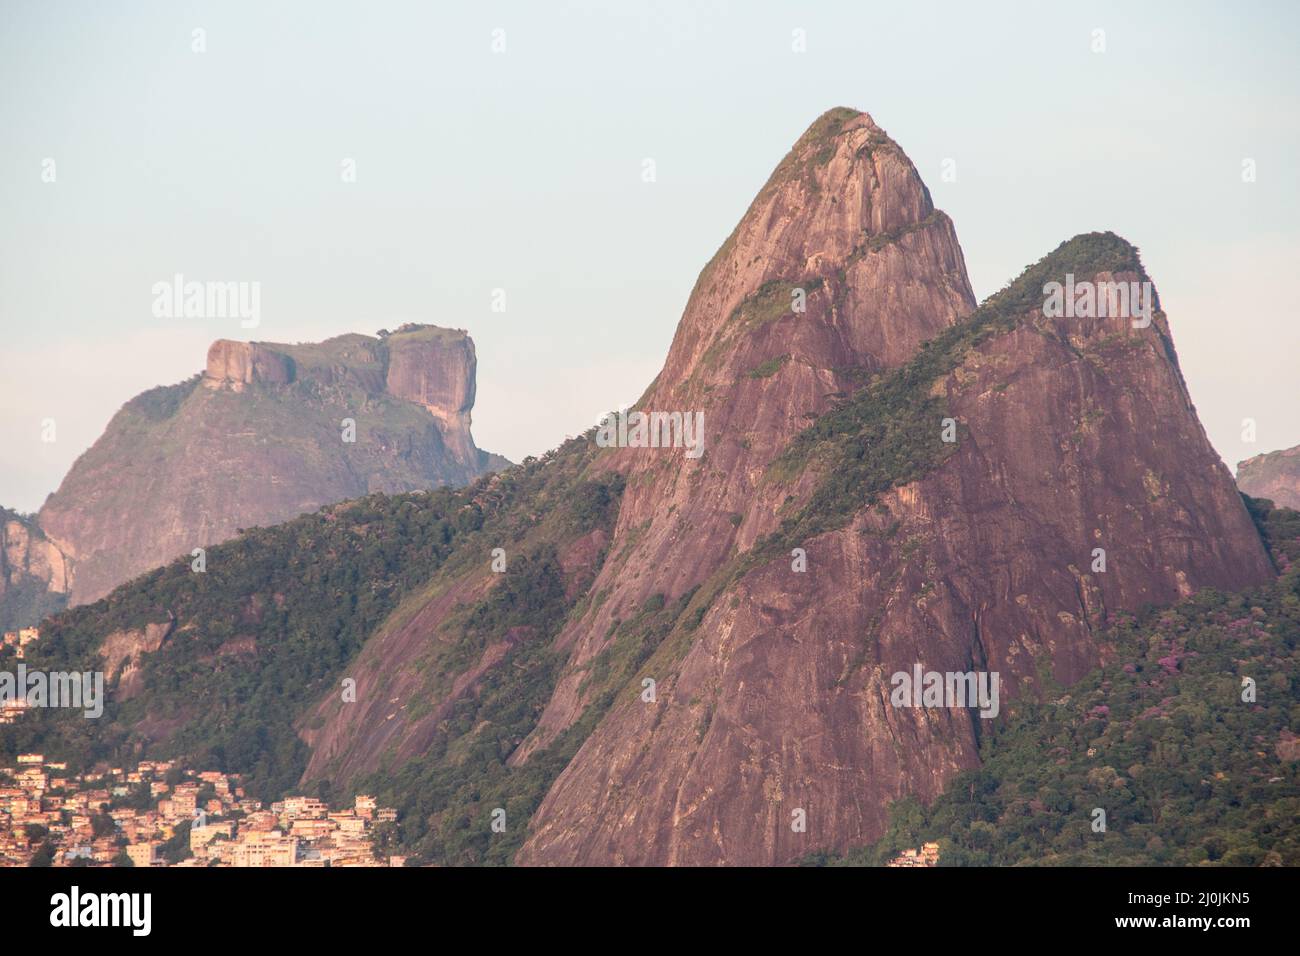 Two hill brother and gavea stone seen from ipanema beach in rio de janeiro, Brazil. Stock Photo